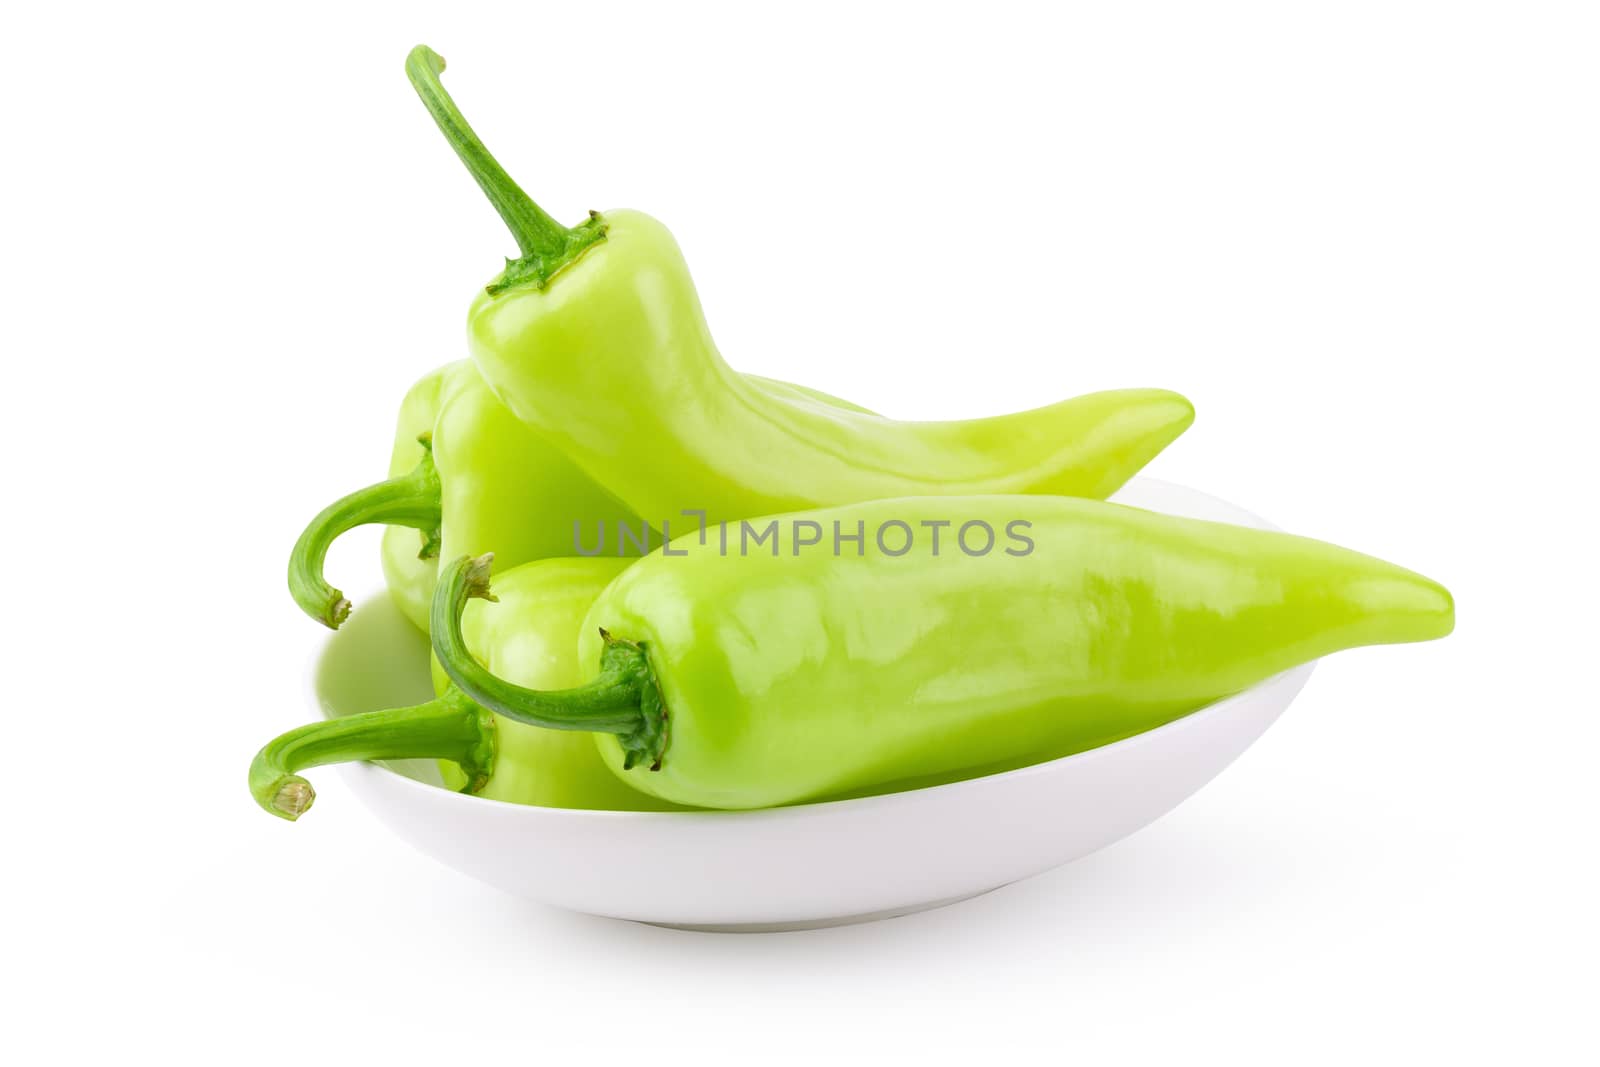 Green hot chili peppers in white ceramic bowl isolated on white background.